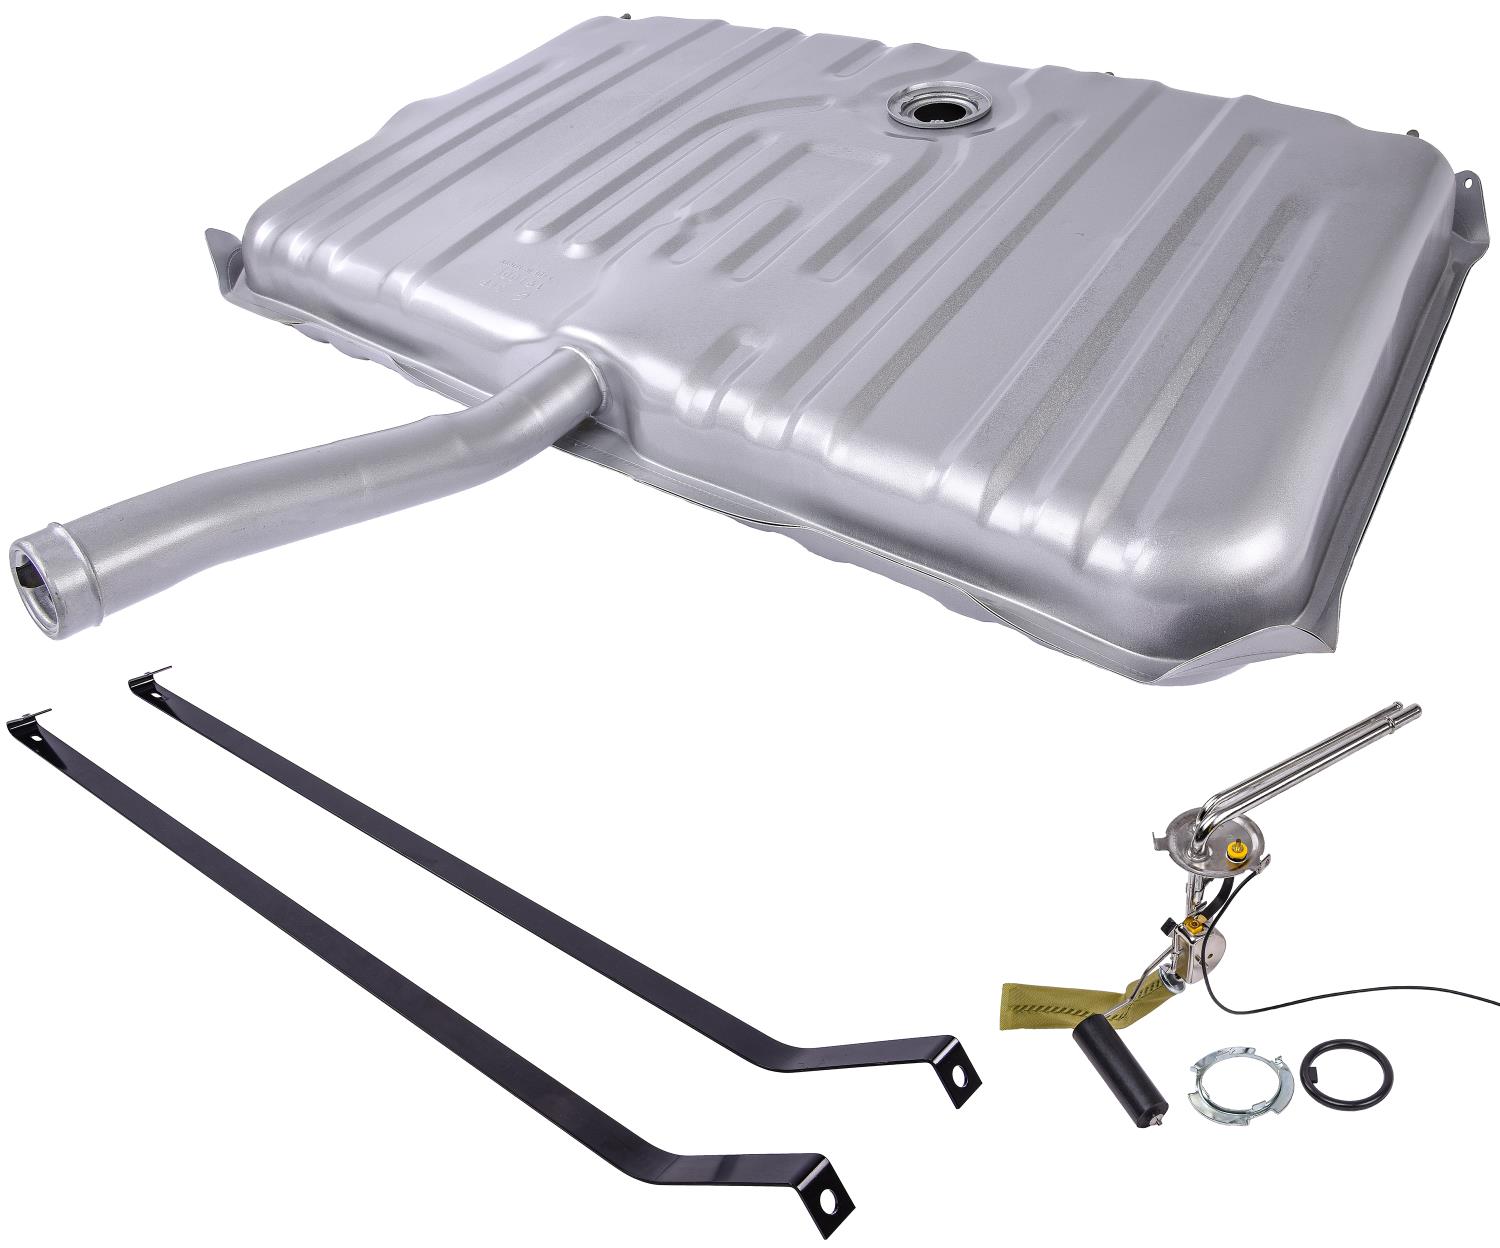 Fuel Tank Kit with Straps & Sending Unit for 1971-1972 GM A-Body Cars [20-Gallon Tank]